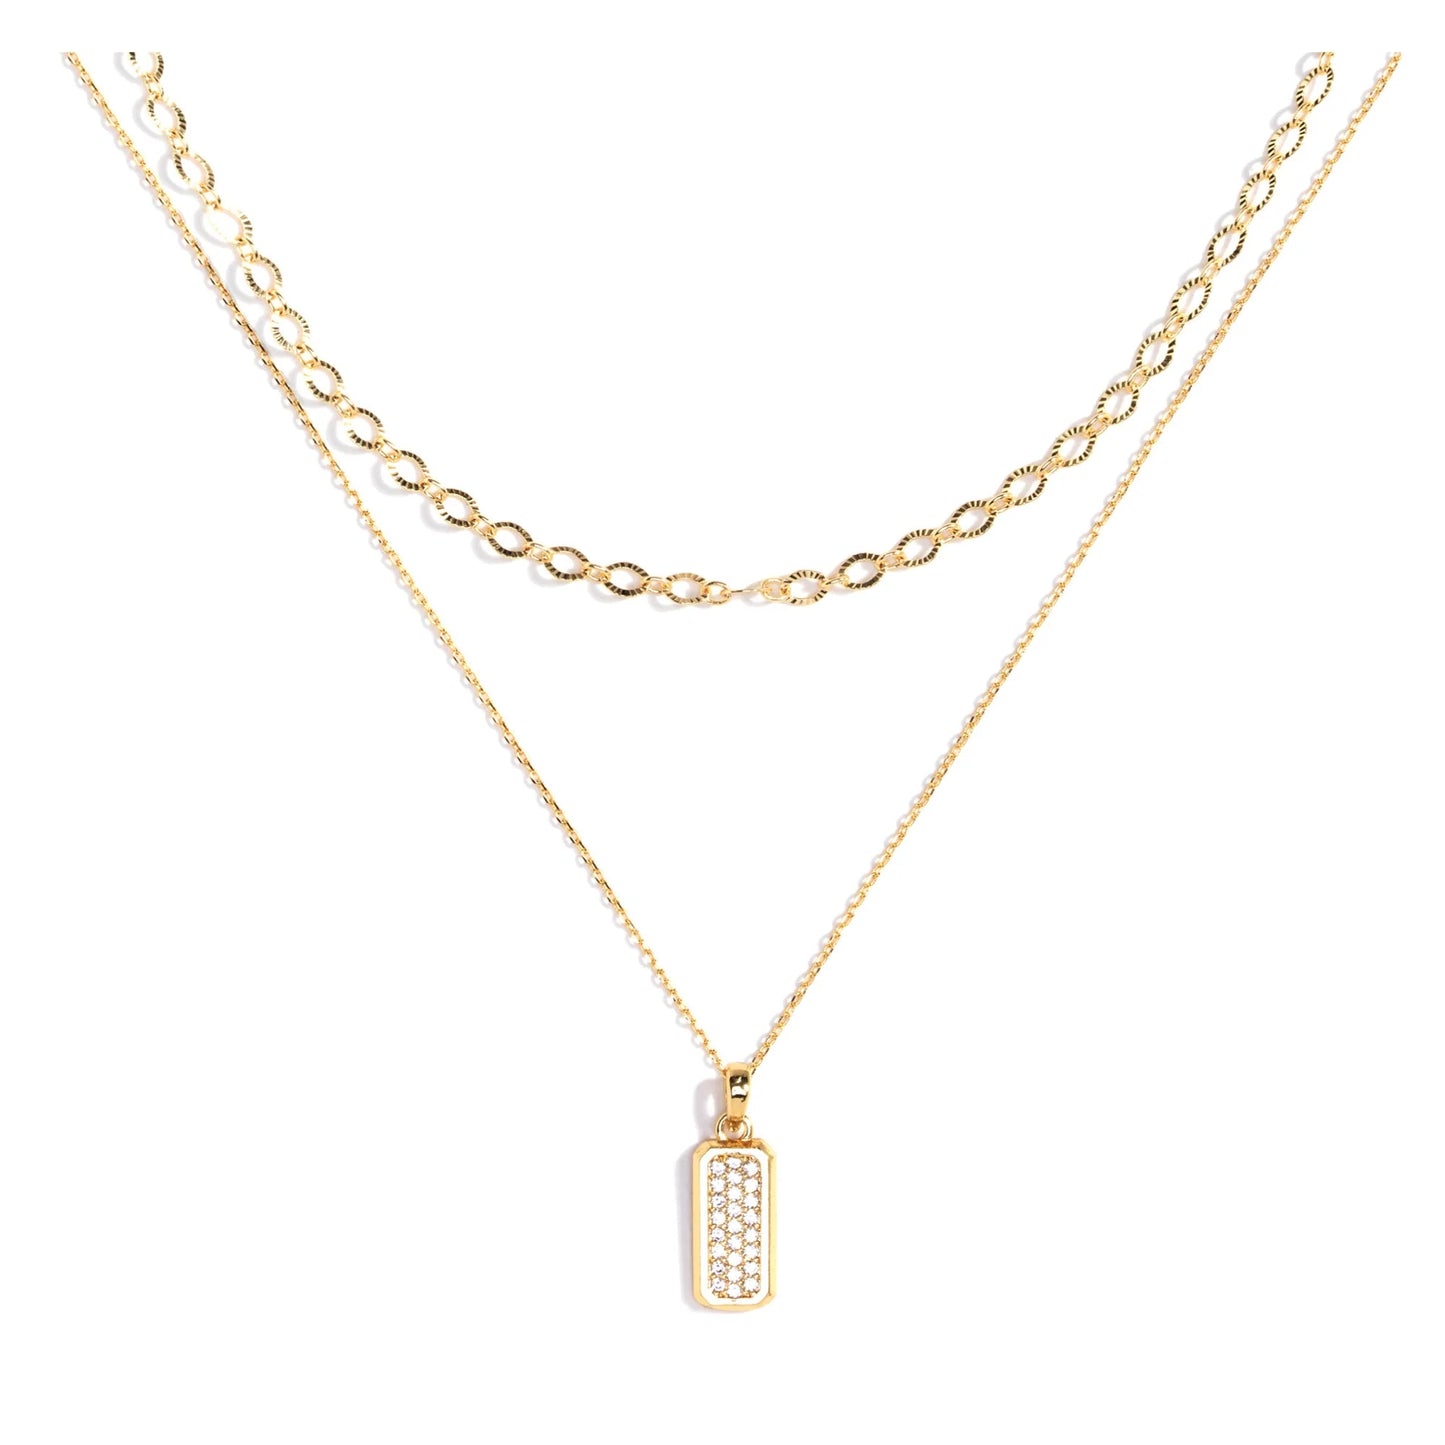 Double Layer Textured Chain Pendant Necklace Gold